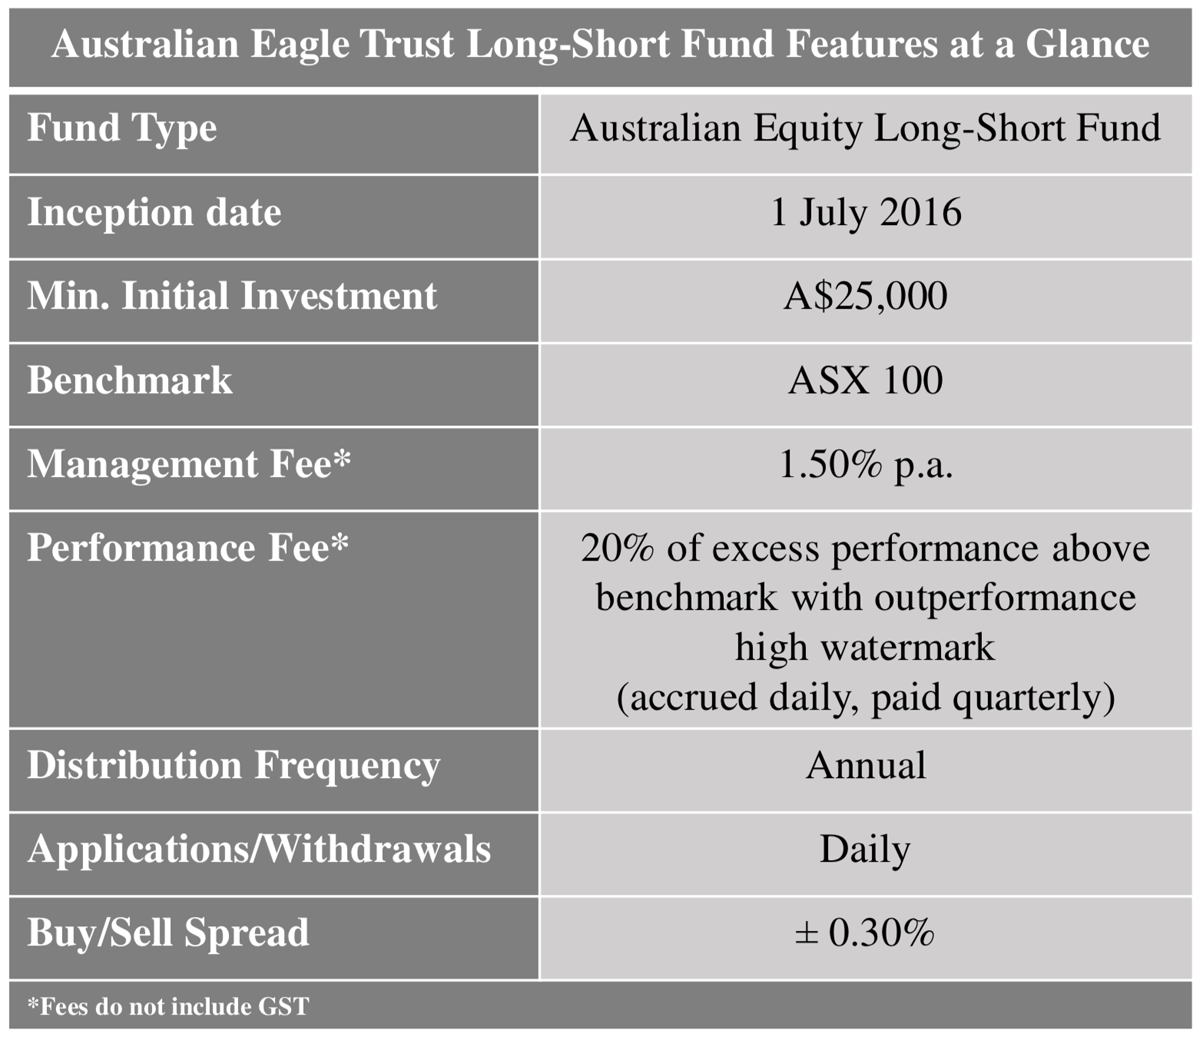 Fund Features